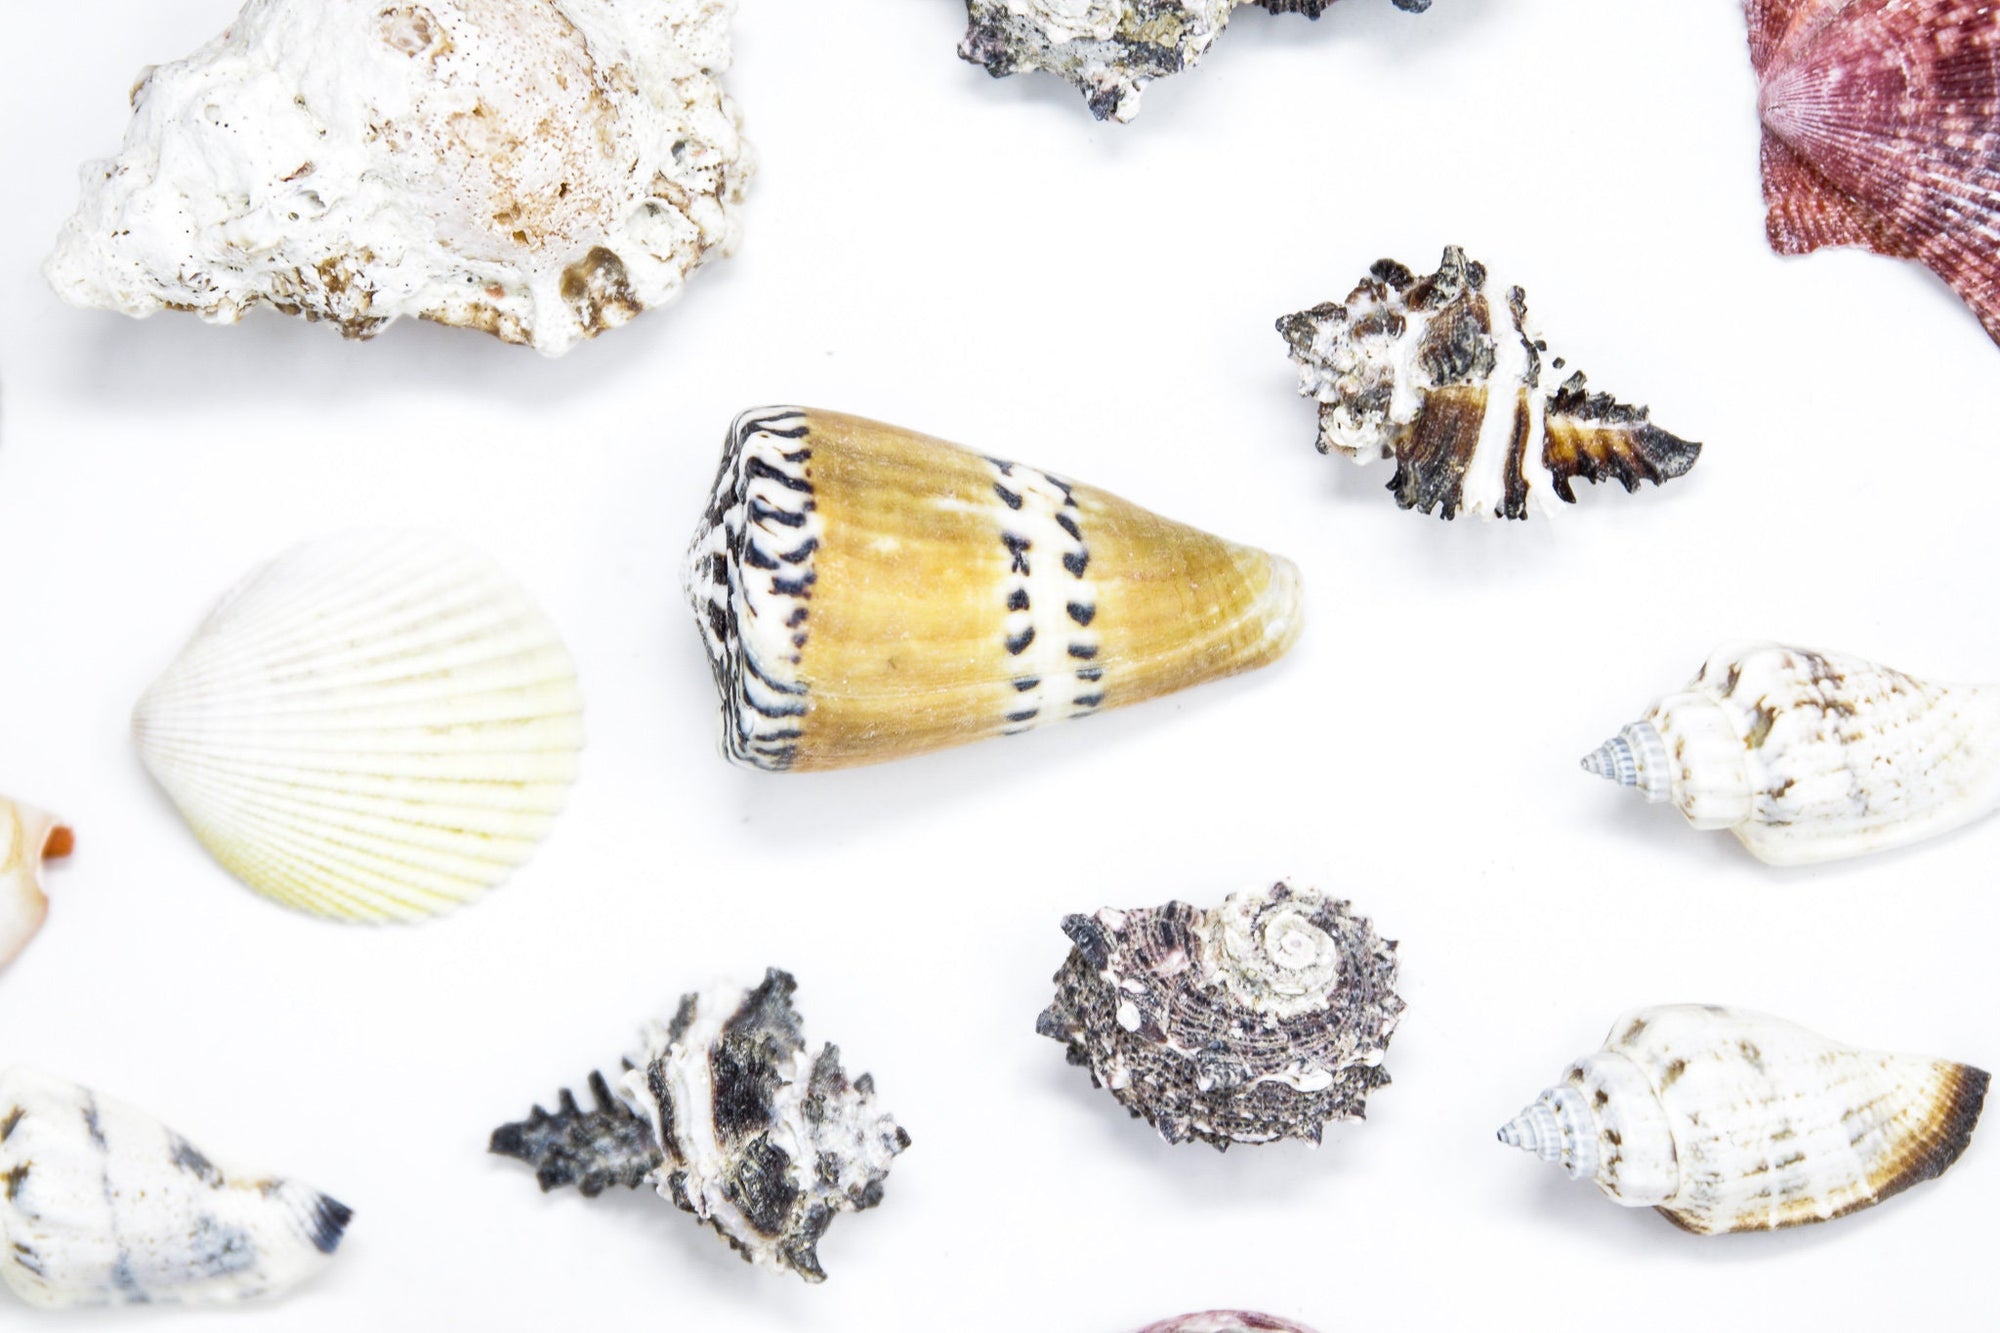 Tropical Sea Shells Collection, Ideal for Collecting, Arts & Crafts, Still Life Drawing, Photography